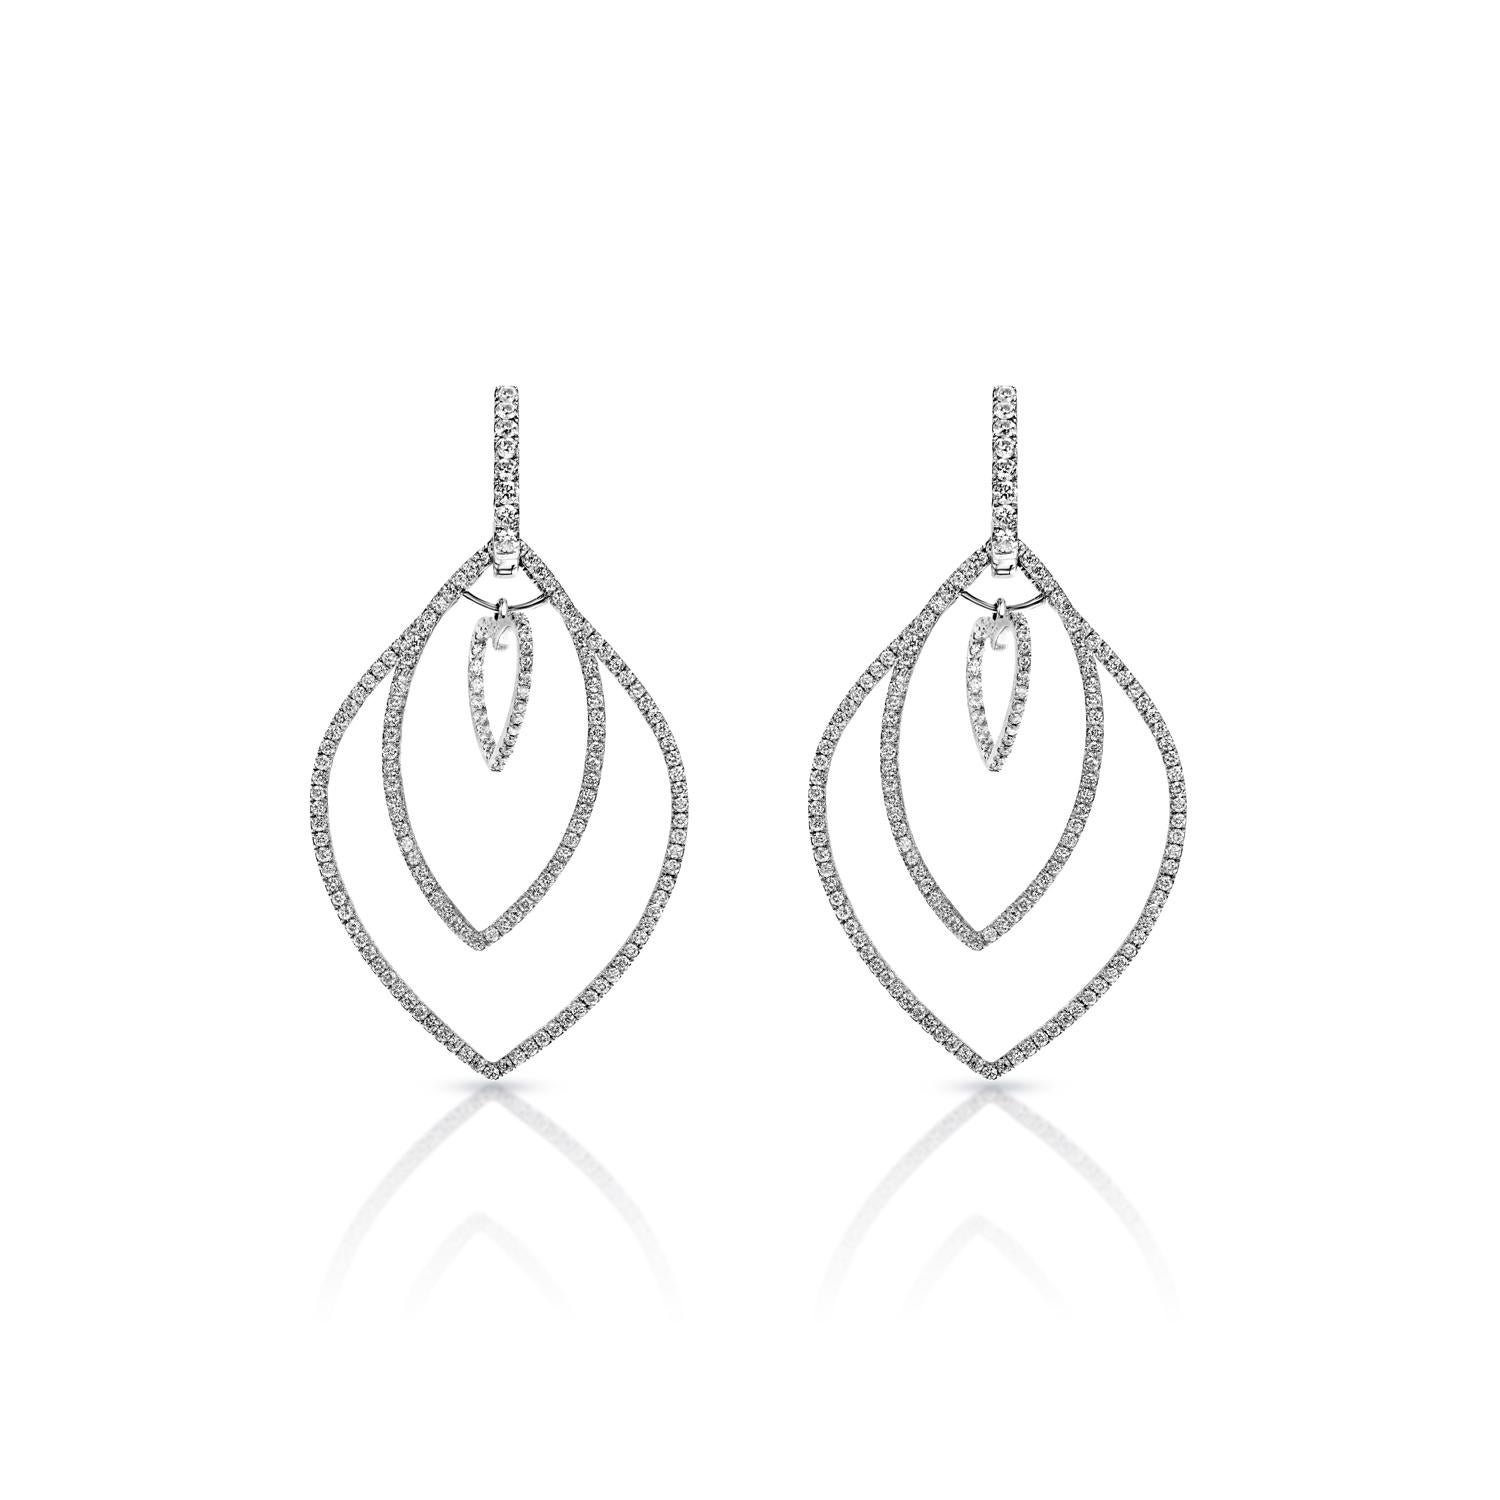 Round Brilliant Diamond Hanging Earrings 

Carat Weight: 2.85 Carats
Shape: Round Brilliant Cut
Metal: 14 Karat White Gold 8.76 Grams
Style: Hanging Earrings